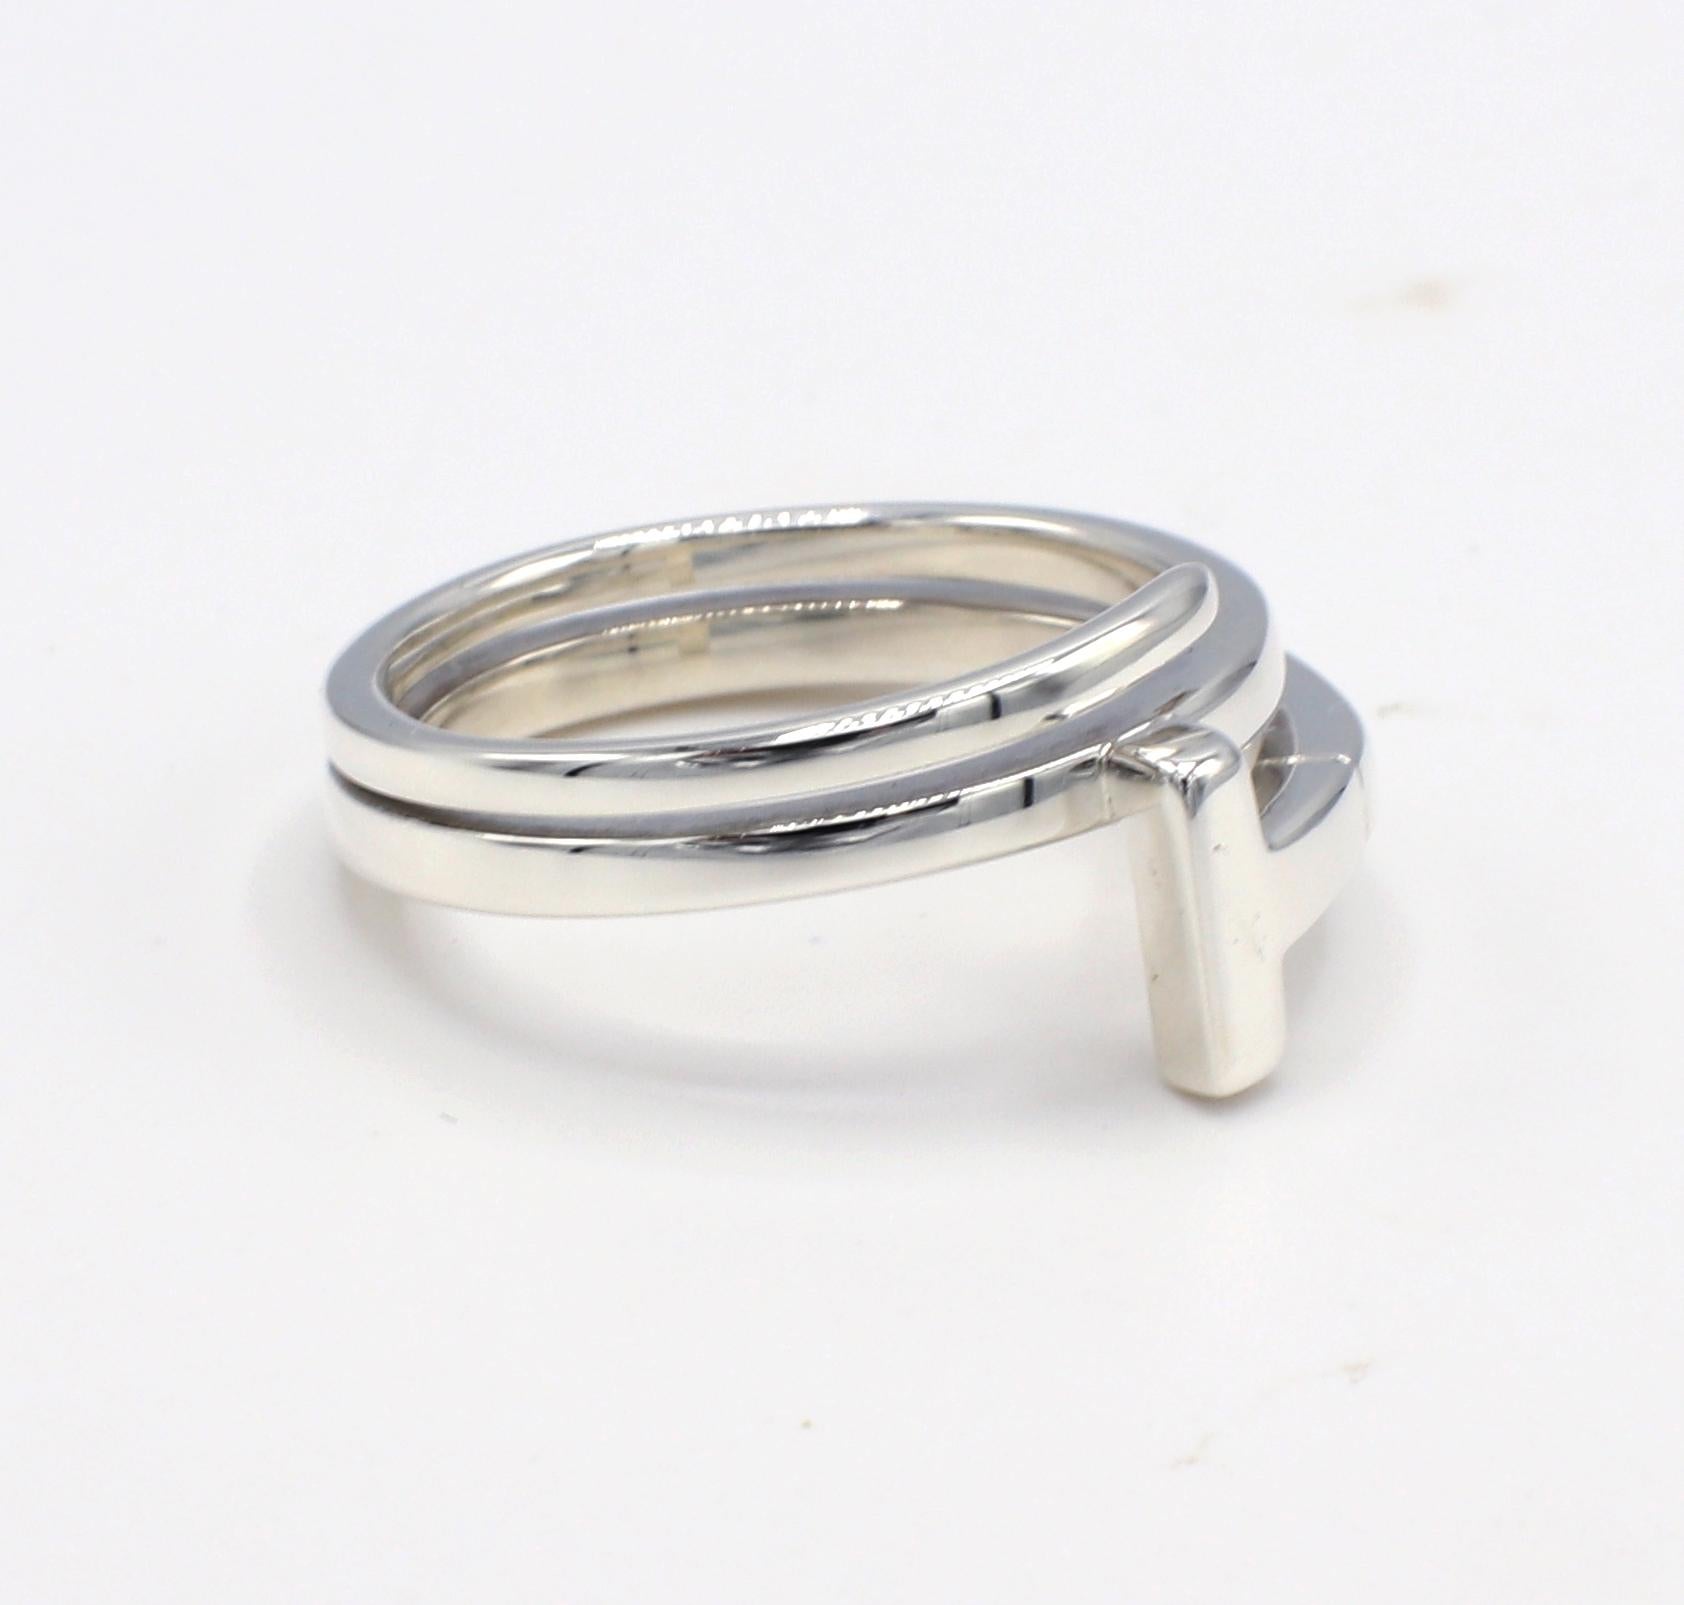 Tiffany & Co. T Collection Sterling Silver Wrap Coin Ring 
Metal: Sterling silver 925
Weight: 5.34 grams
Size: 7.5 (US)
Signed: T&Co Ag925 Italy 
